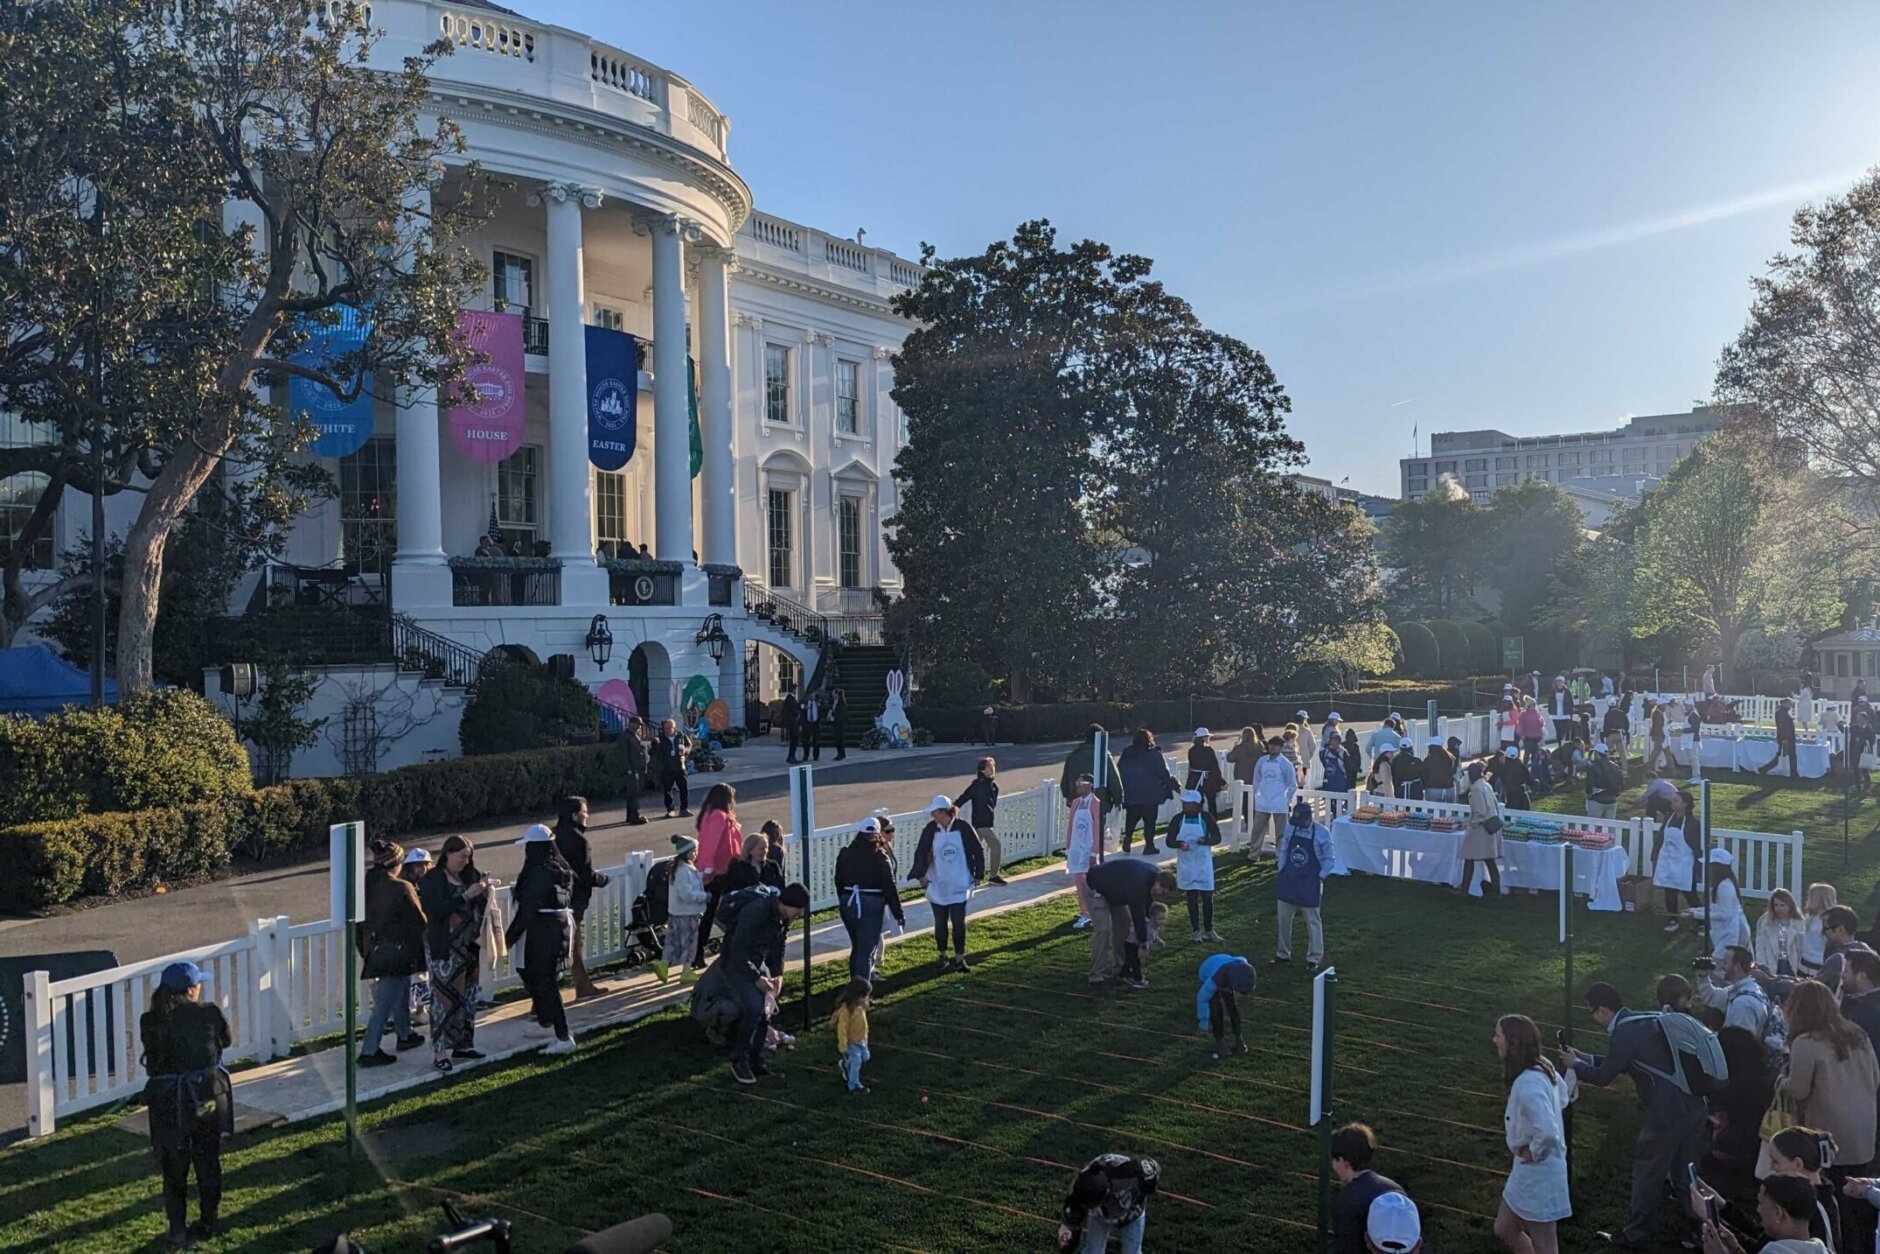 <p>Around 30,000 eggs have been <a href="https://wtop.com/holidays/2023/04/where-all-the-eggs-for-the-white-house-easter-egg-roll-come-from/" target="_blank" rel="noopener">shipped from the Braswell Family farm</a> in North Carolina to the White House for the annual Easter Egg Roll. The team there spent weeks hard boiling and dying them neon pink and royal blue before dropping them off.</p>
